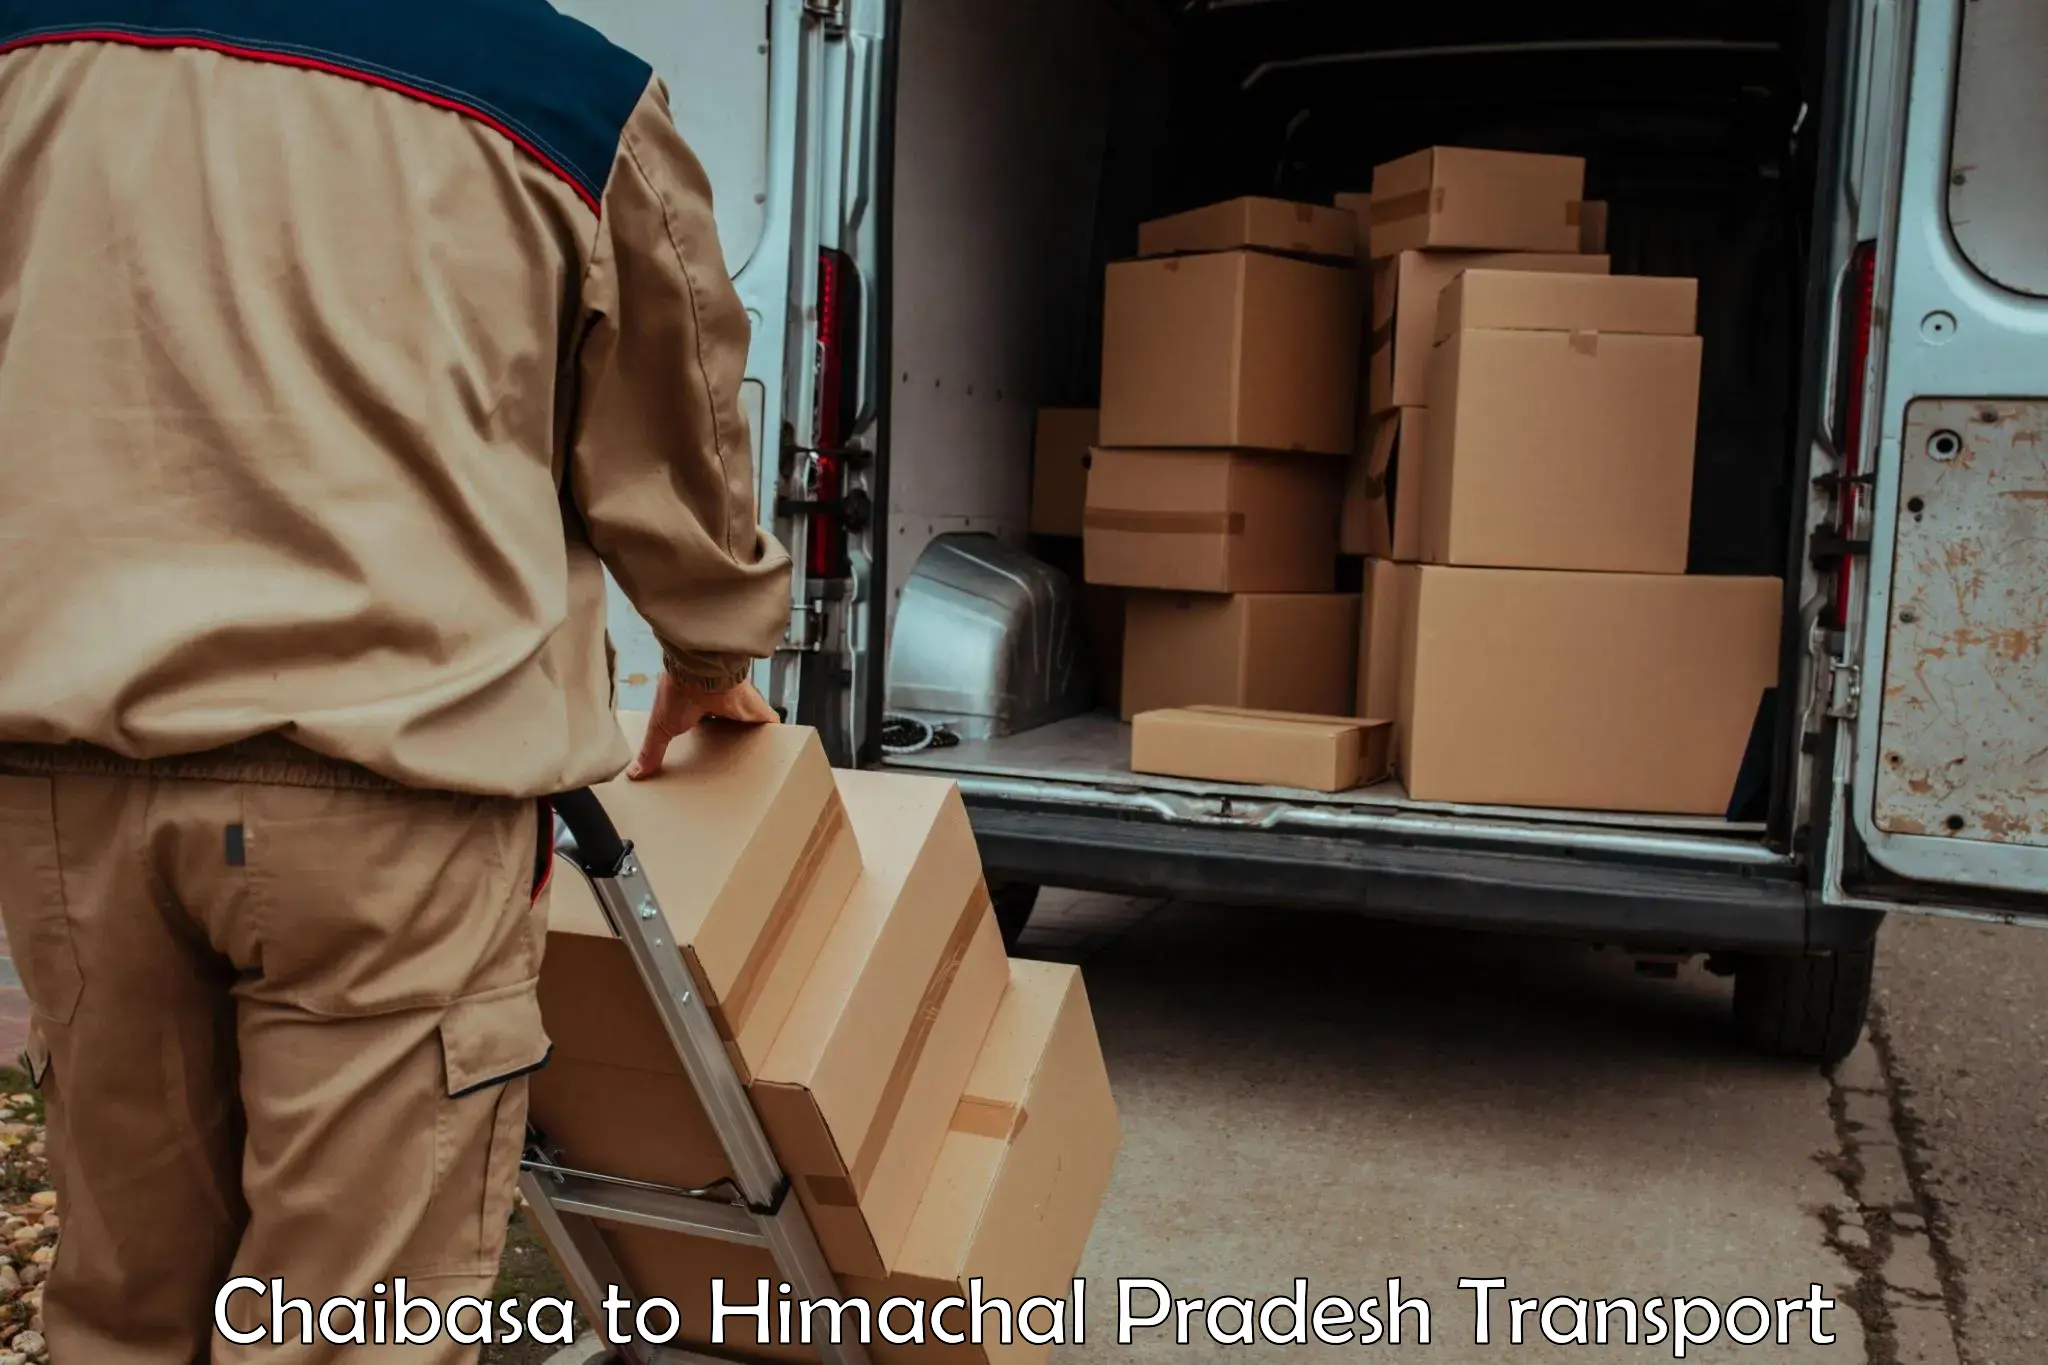 Part load transport service in India Chaibasa to Dharamshala